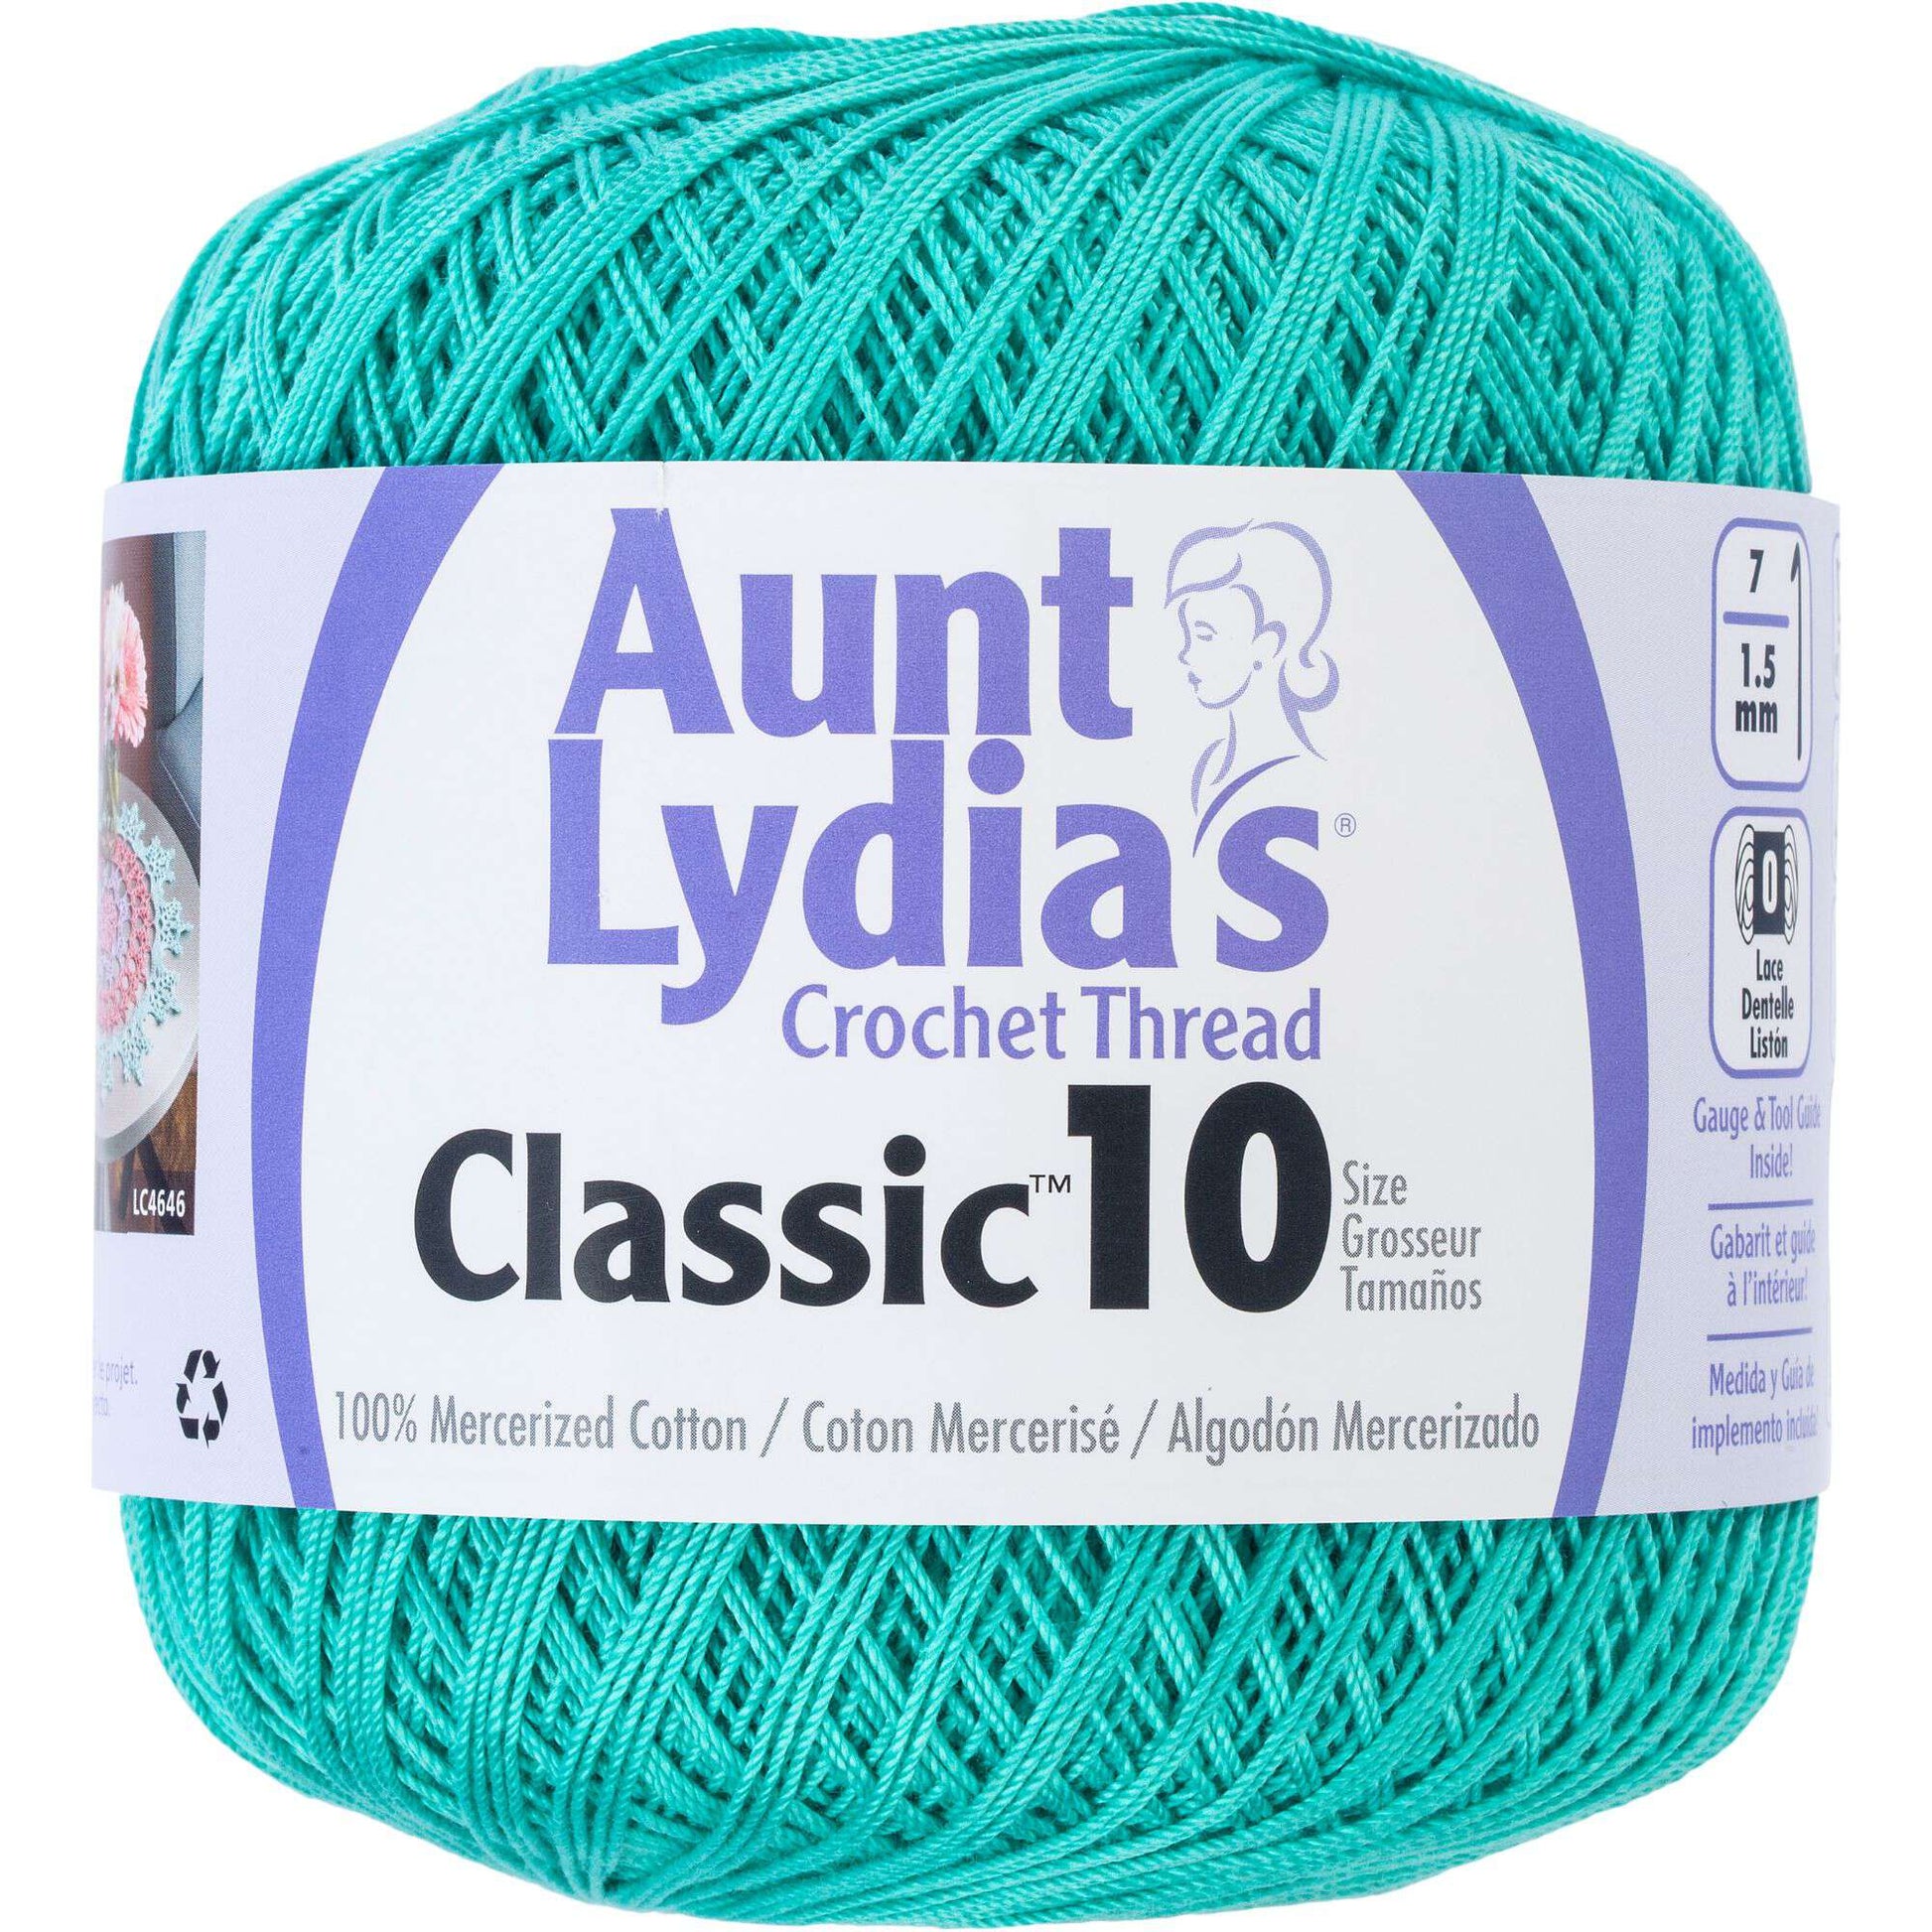 Aunt Lydia's Classic Crochet Thread Size 10 - Clearance shades